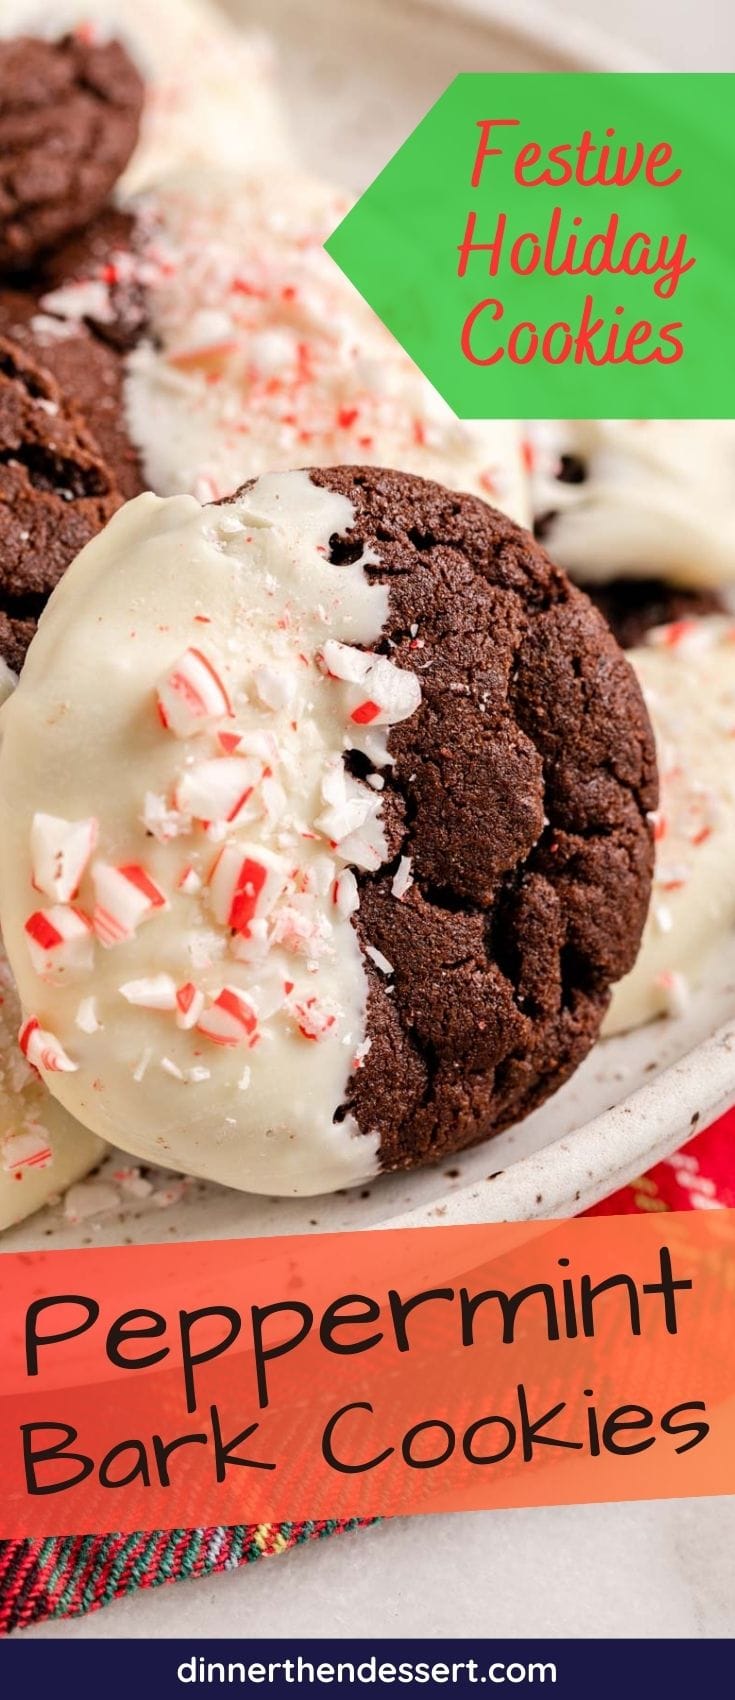 Peppermint Bark Cookies piled on plate, recipe title across bottom